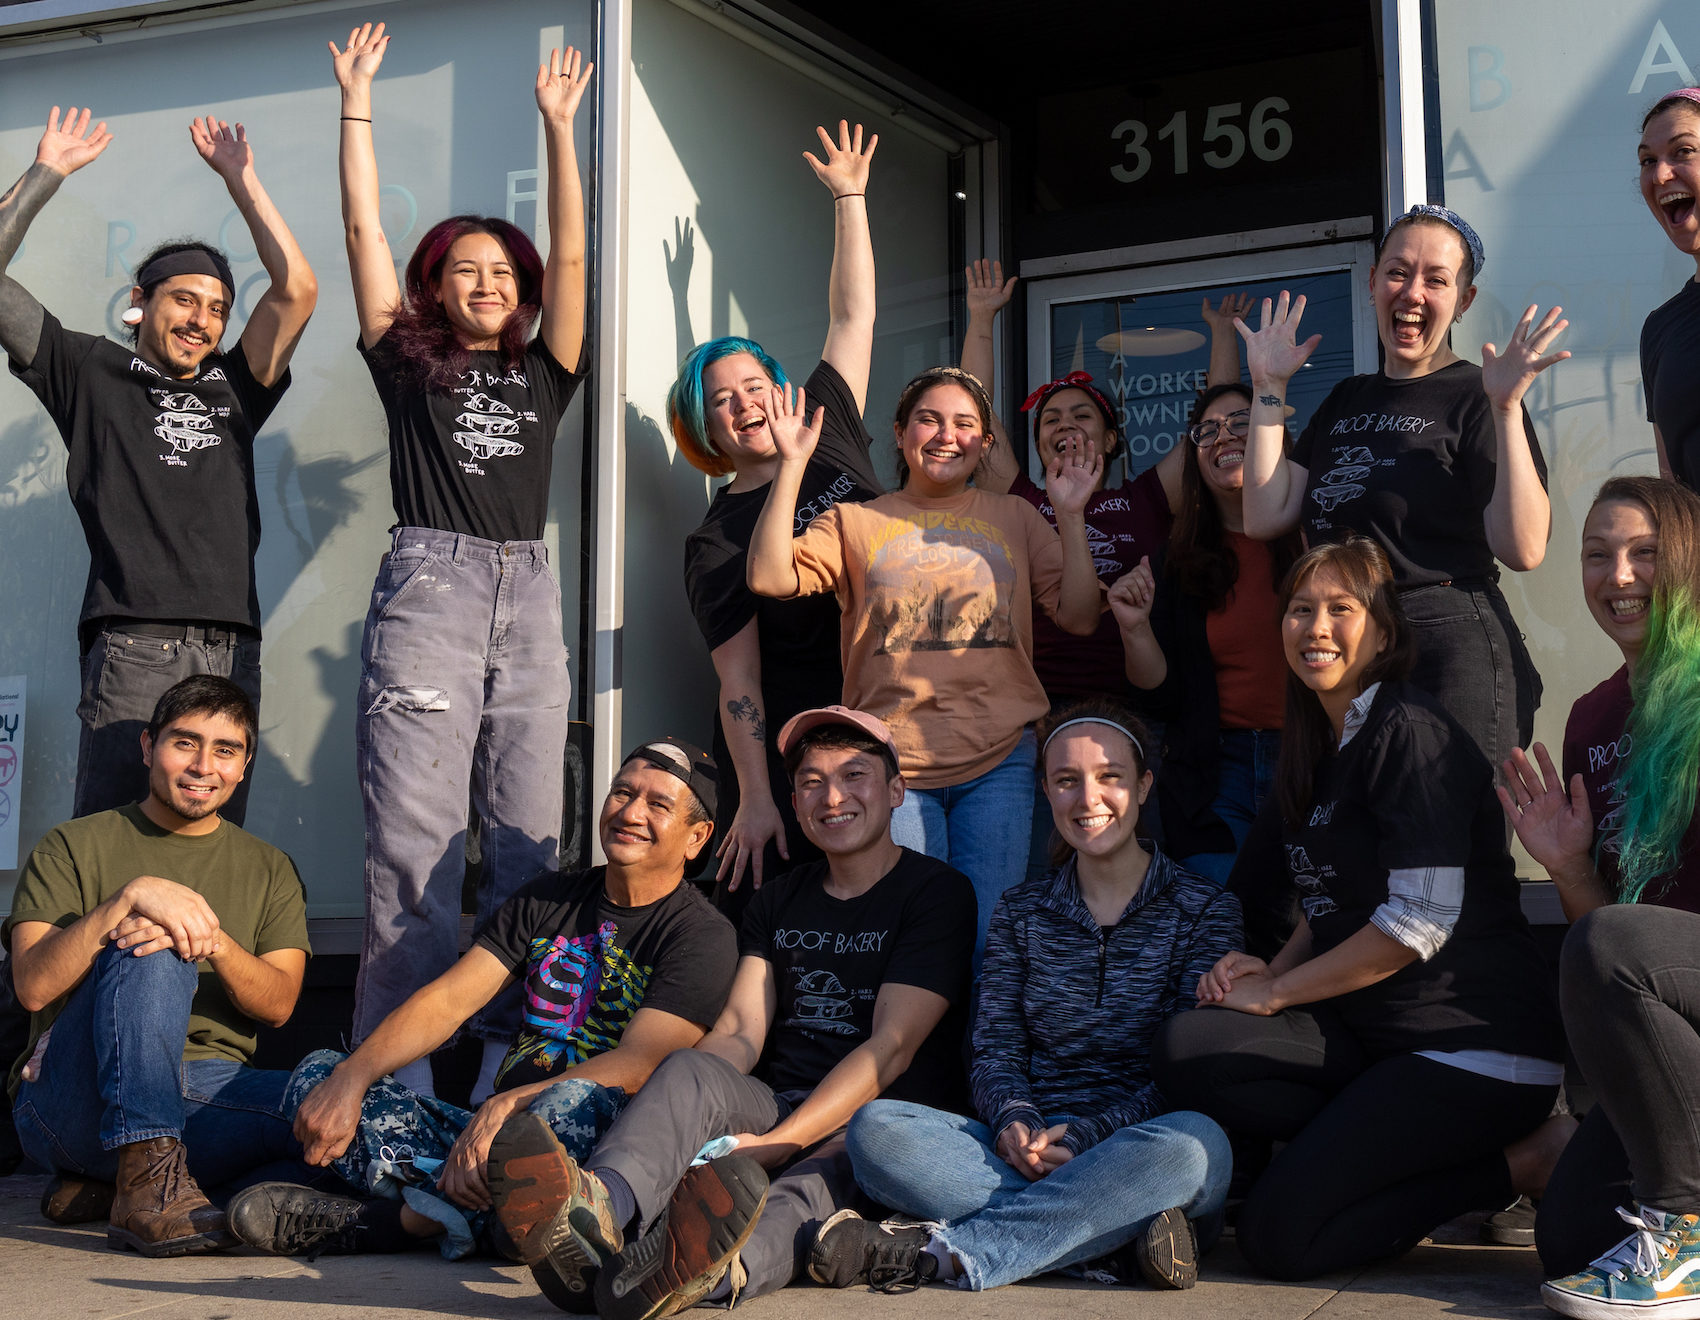 Photo credit: ICA Fund. Worker Owners of Proof Bakery Los Angeles, CA